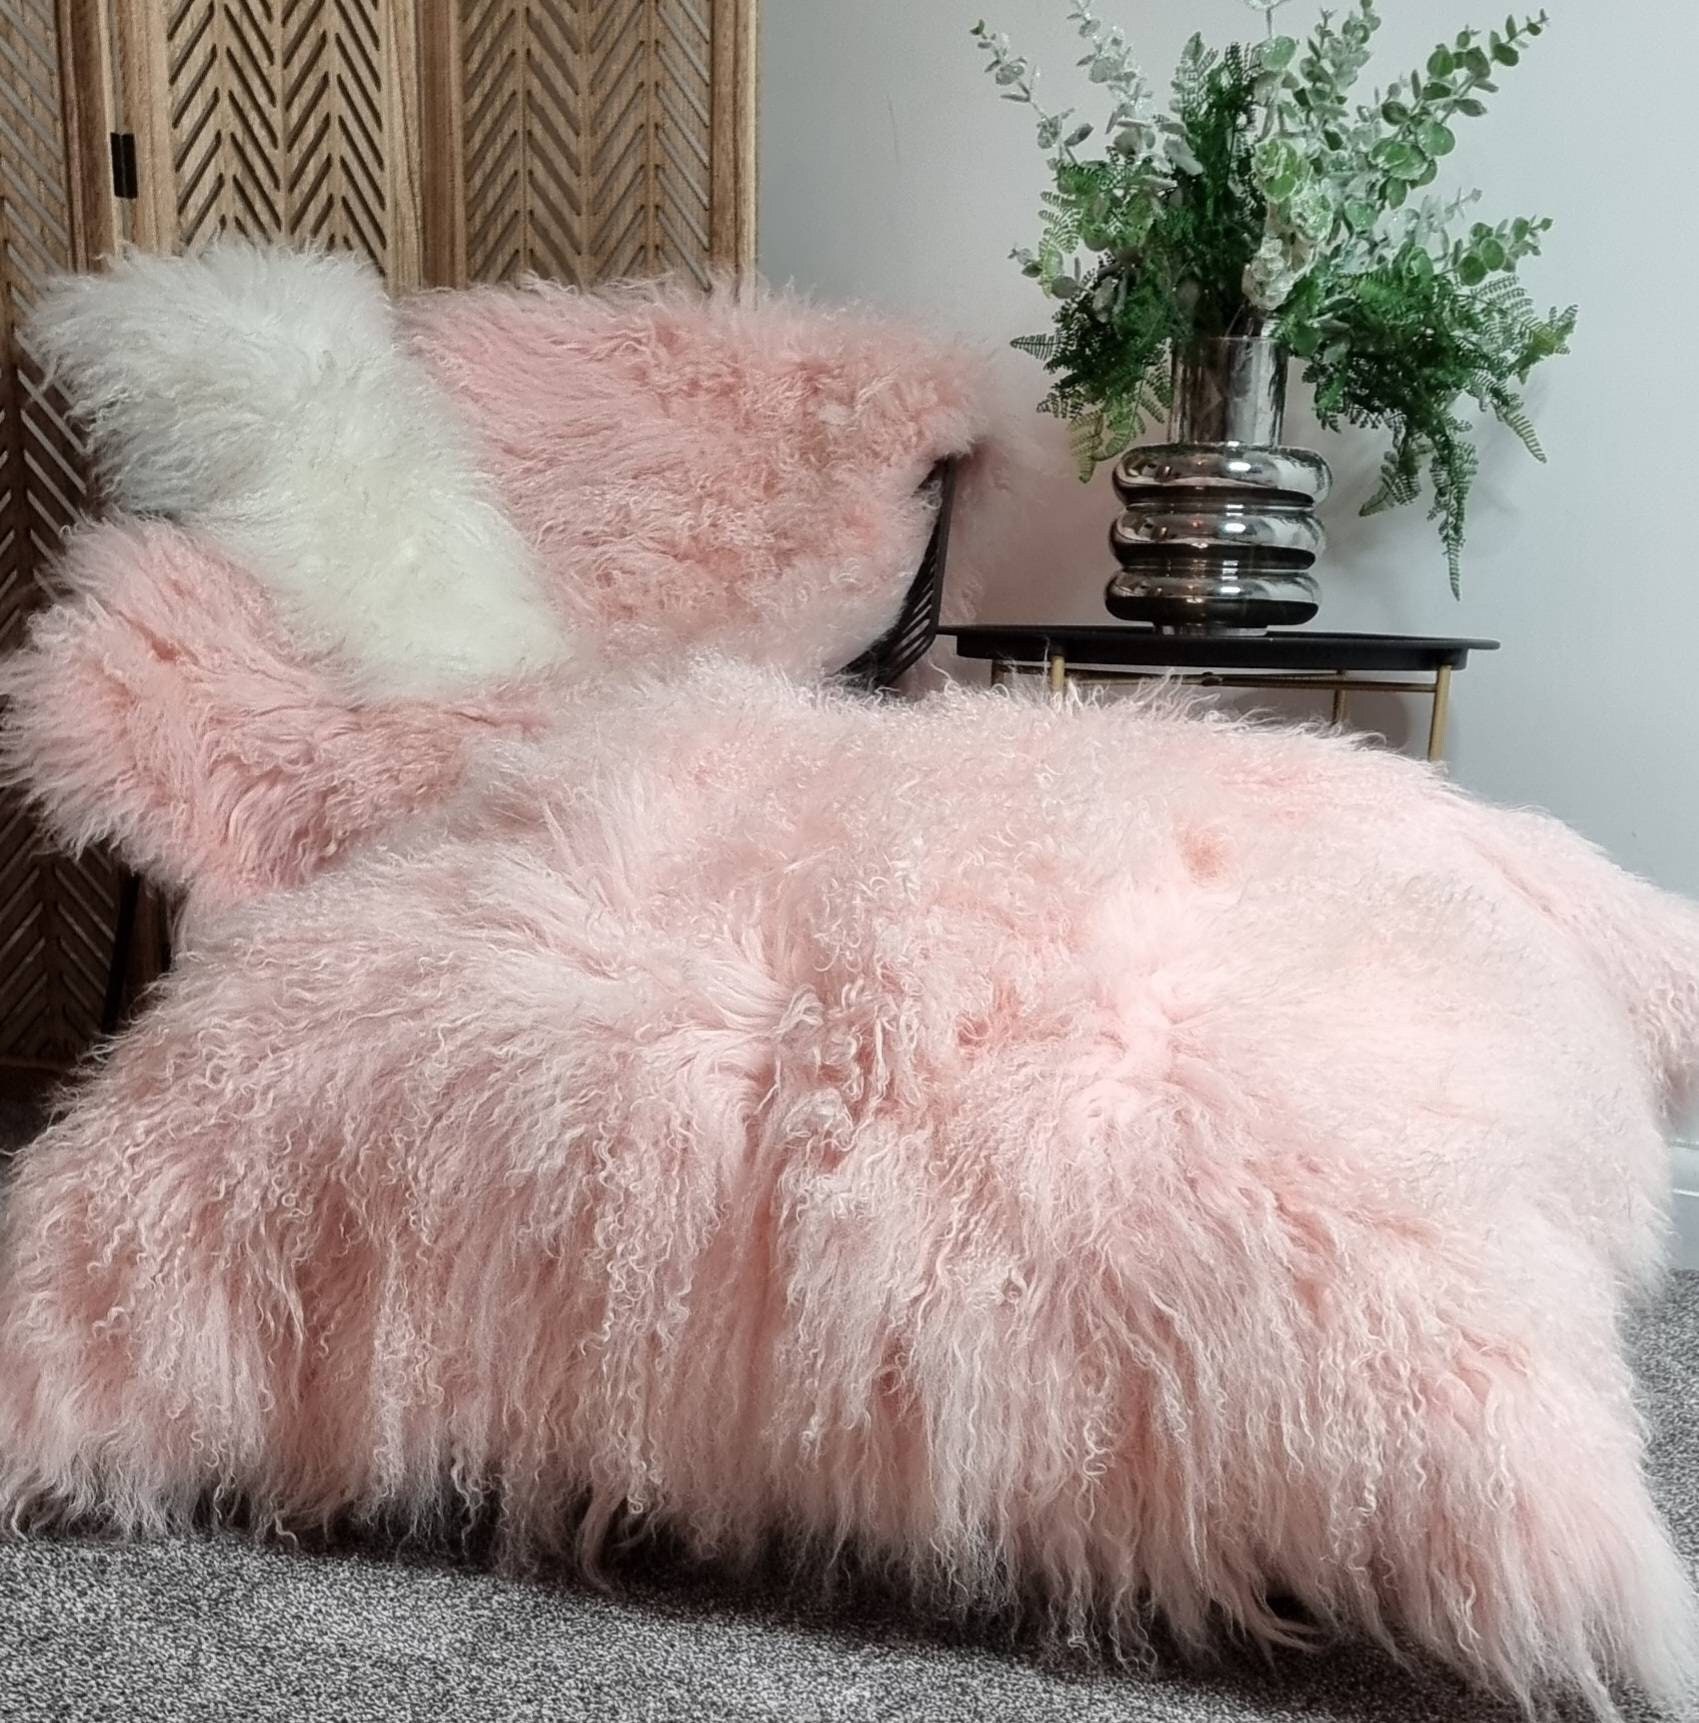 The Gigantic Fluffy Pillow That Broke the Internet Is on Sale Right Now